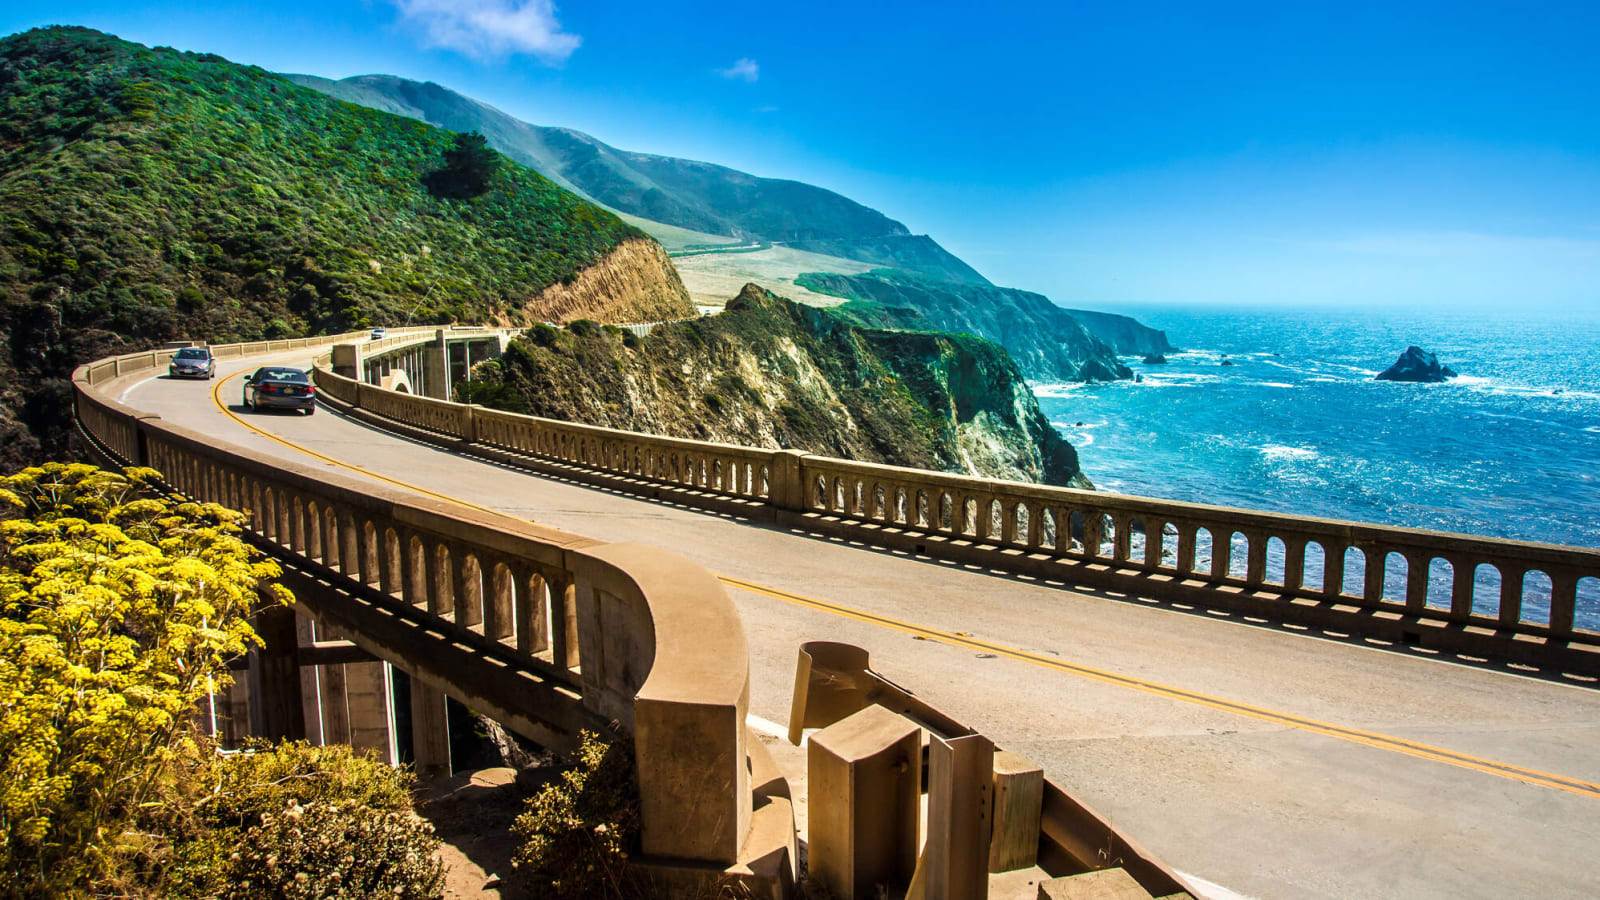 15 essential scenic drives in the United States